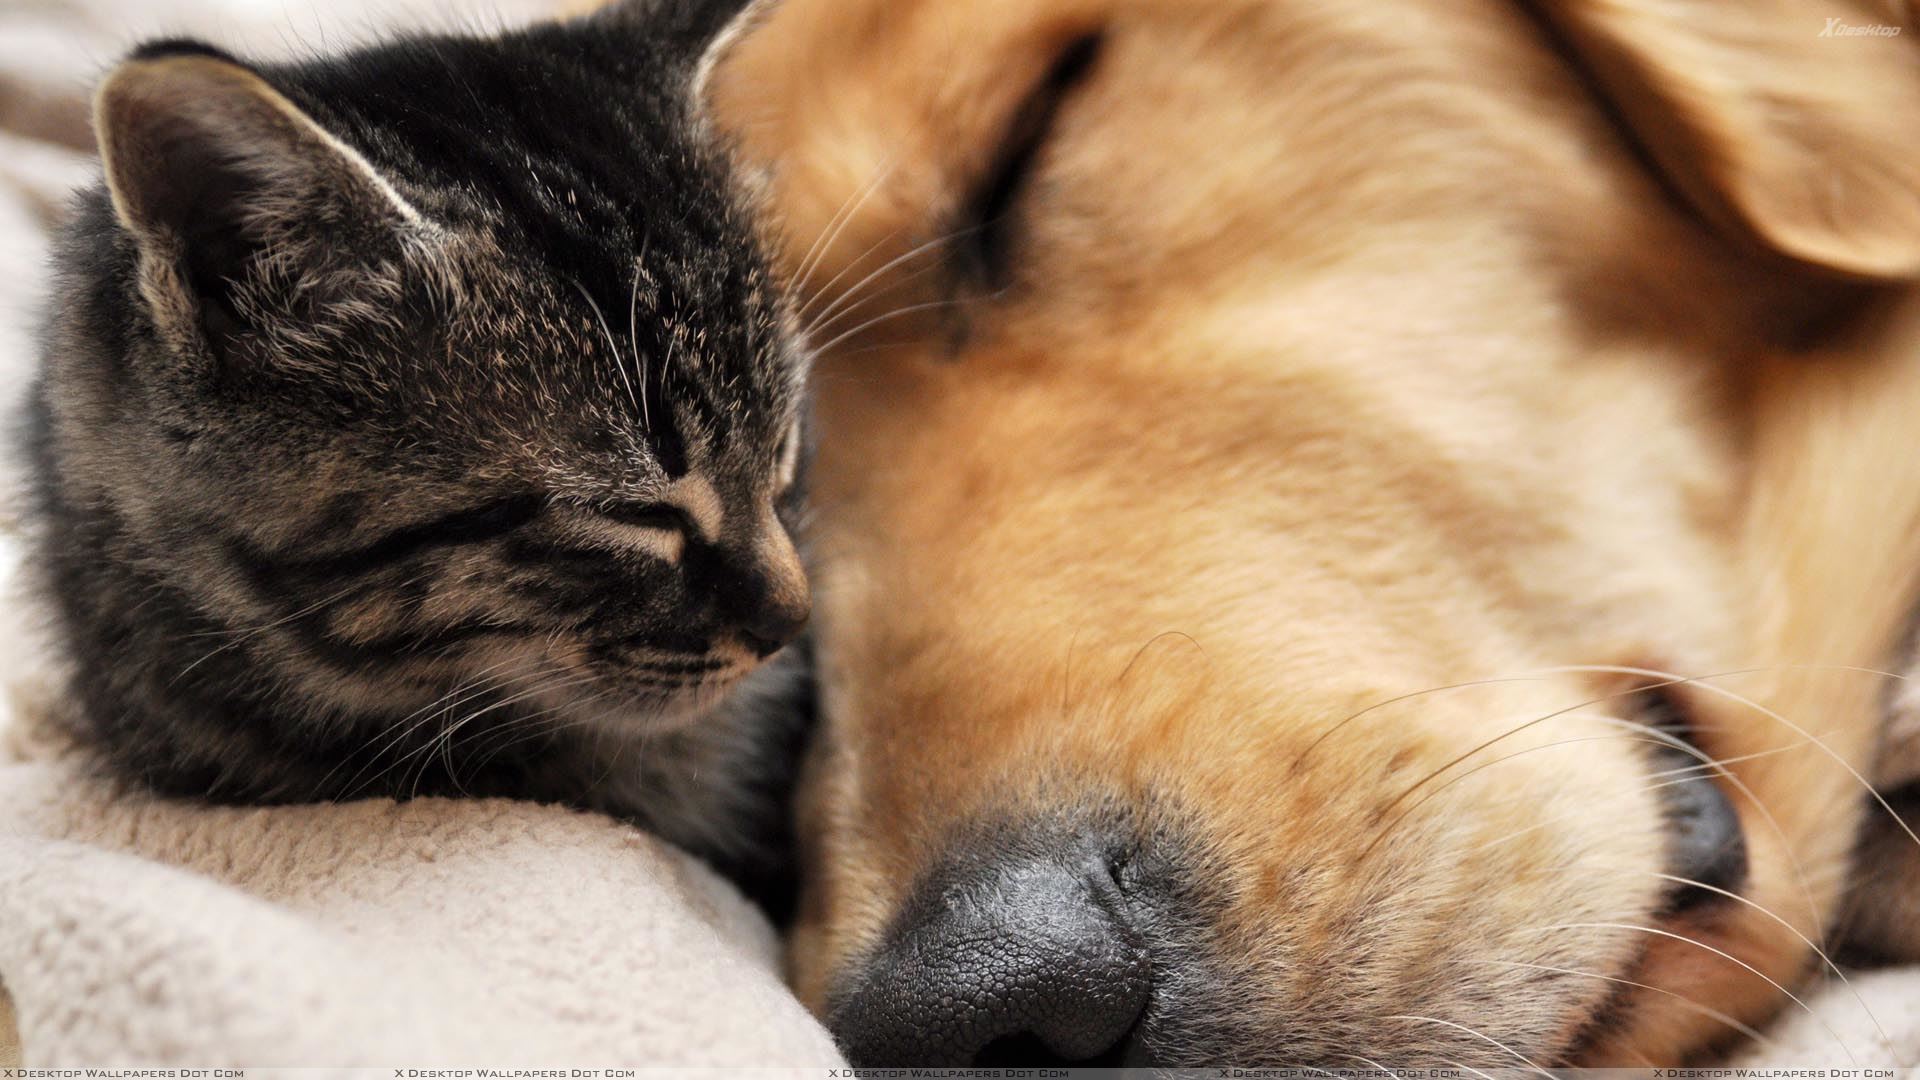 This Is Love, Dog Sleeping With Cat Wallpaper